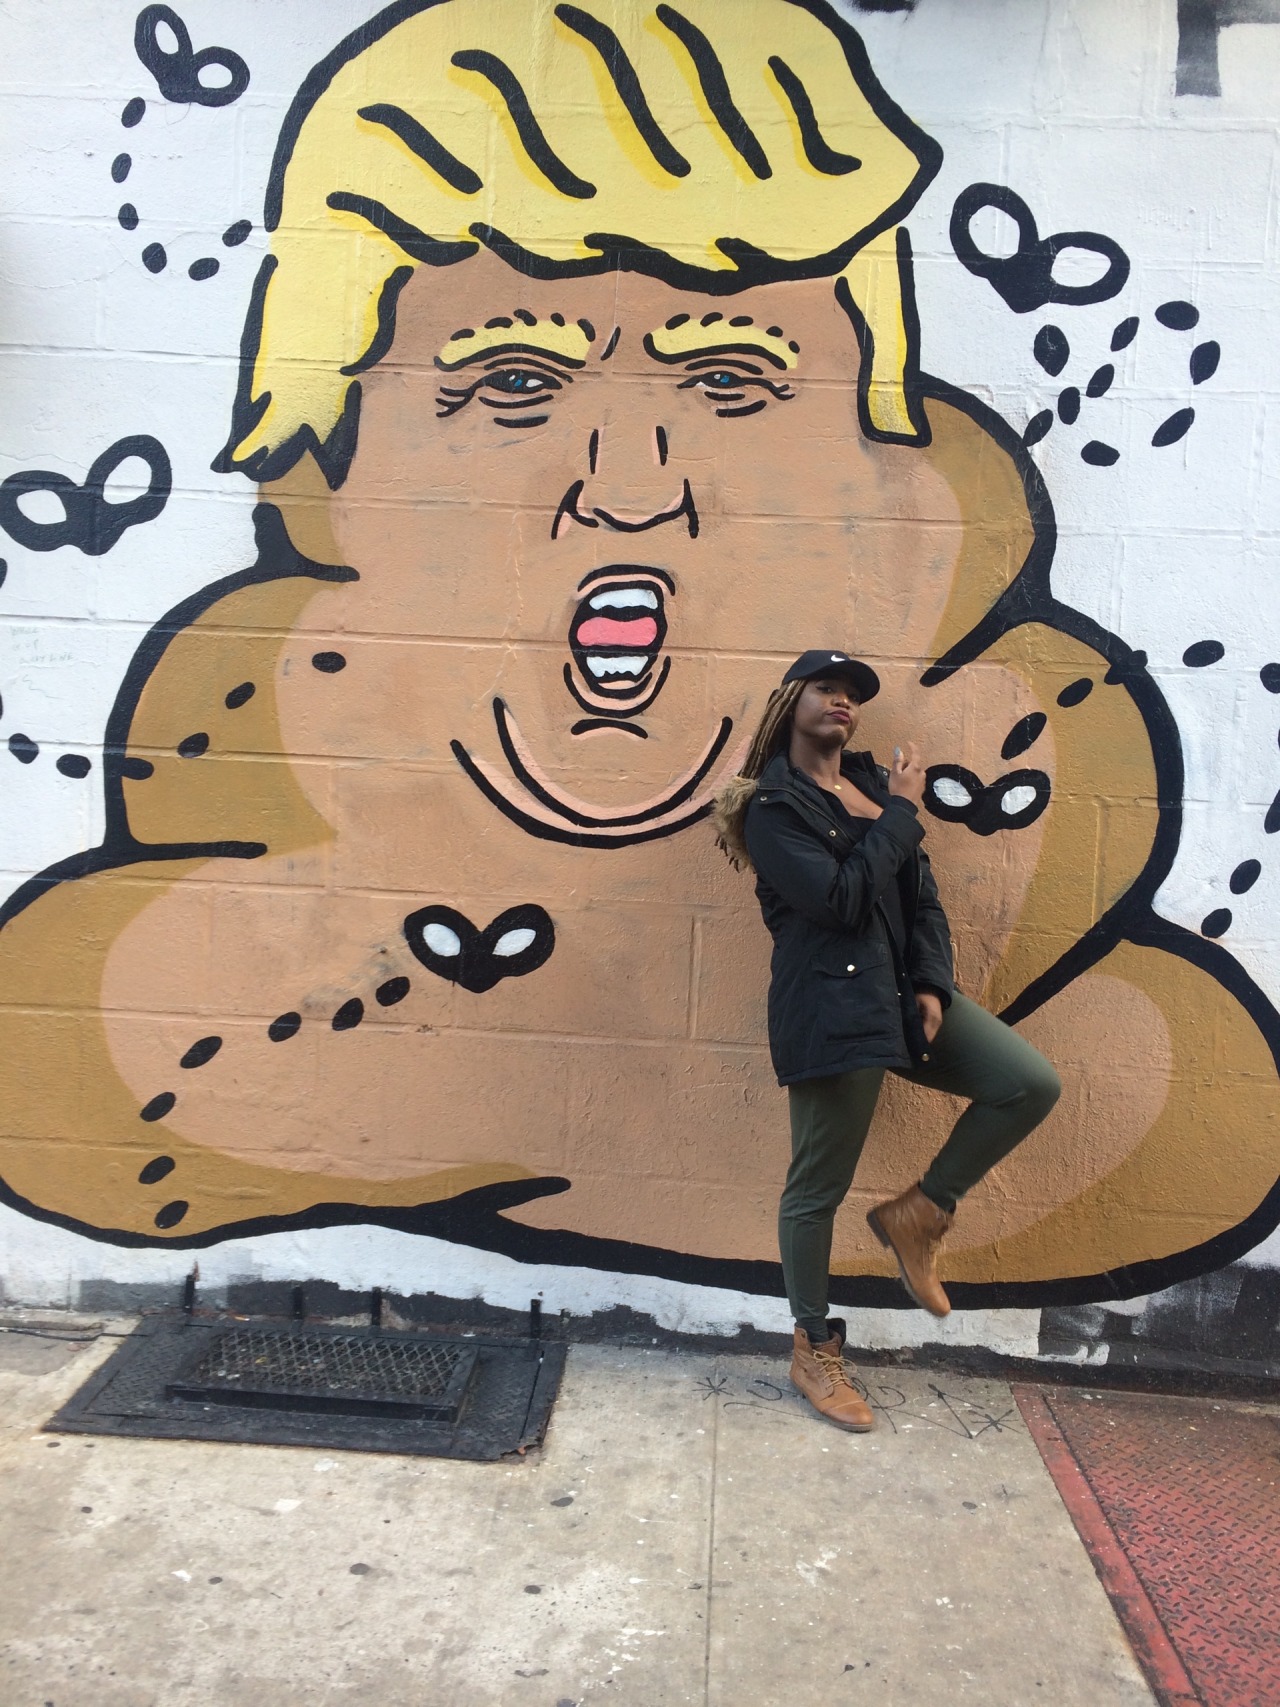 xobeautifiedxo:  If you support Trump you’re a piece of shit too💯😩 -New York,